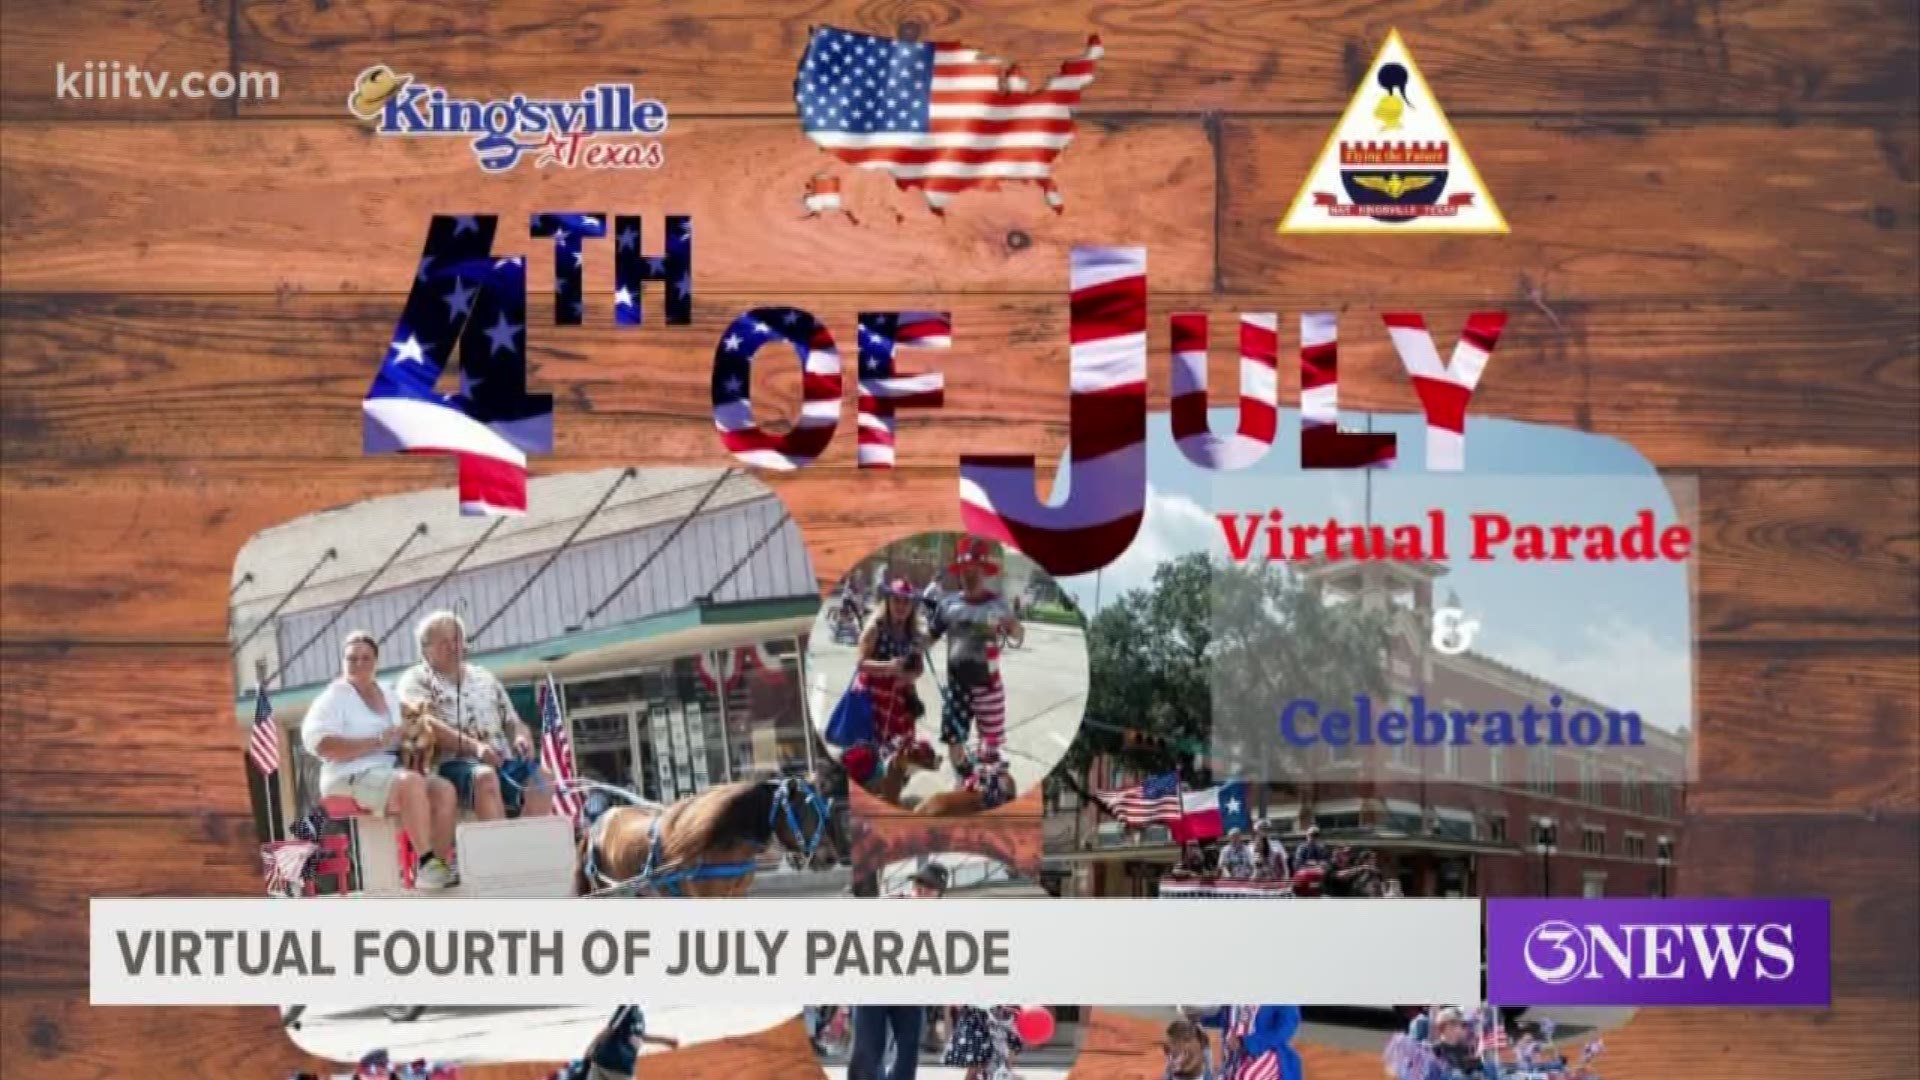 Due to the rise of COVID-19 cases Kingsville’s Fourth of July parade is going virtual.